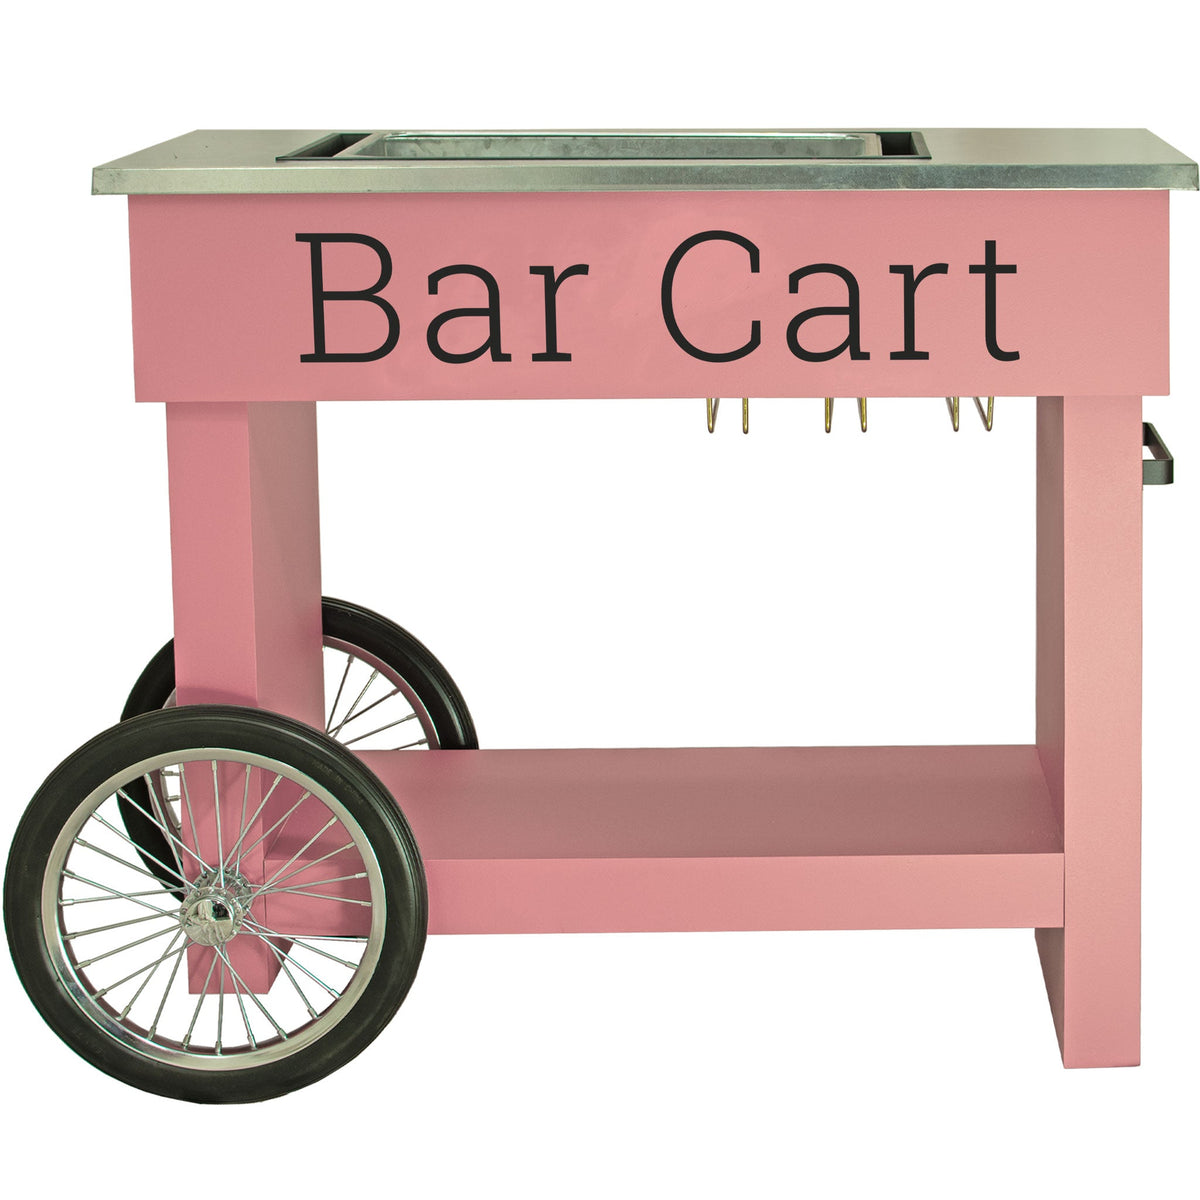 Lee Display's Champagne and Wine Bar Cart with Wheels in Pink Color and a Bar Cart Decal